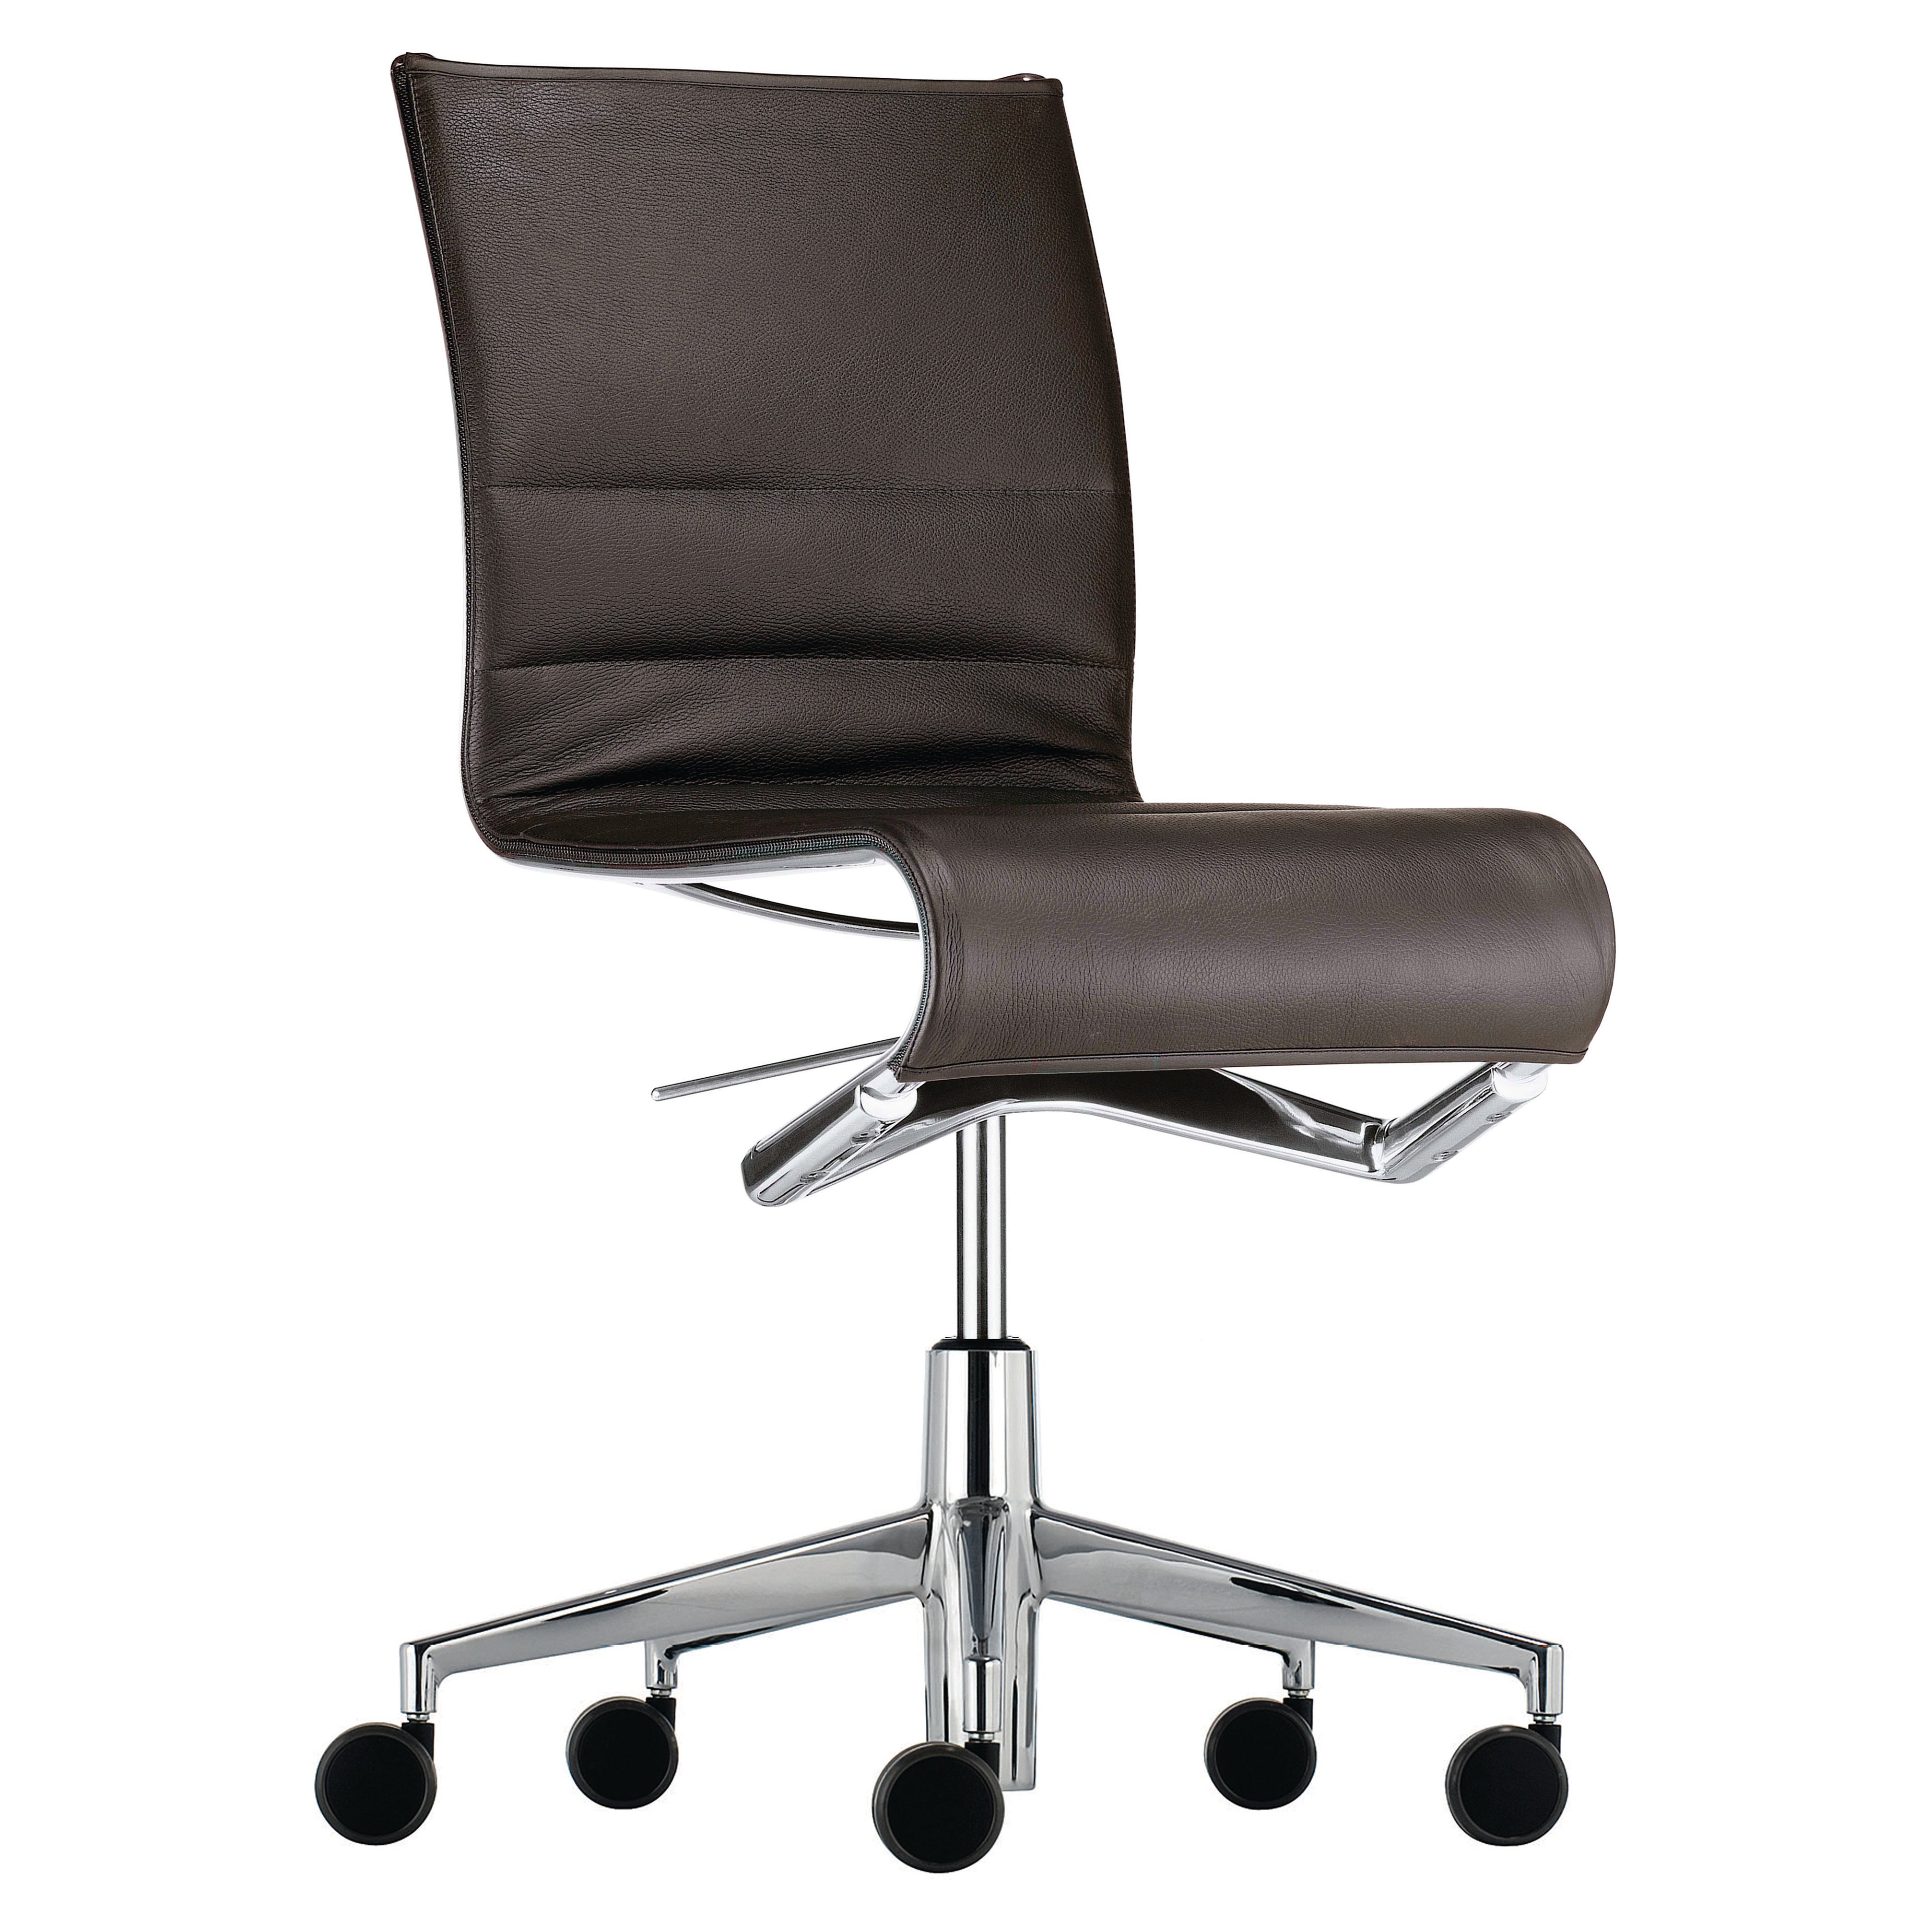 Alias 432 Rollingframe 44 Chair in Brown Leather with Chromed Aluminum Frame